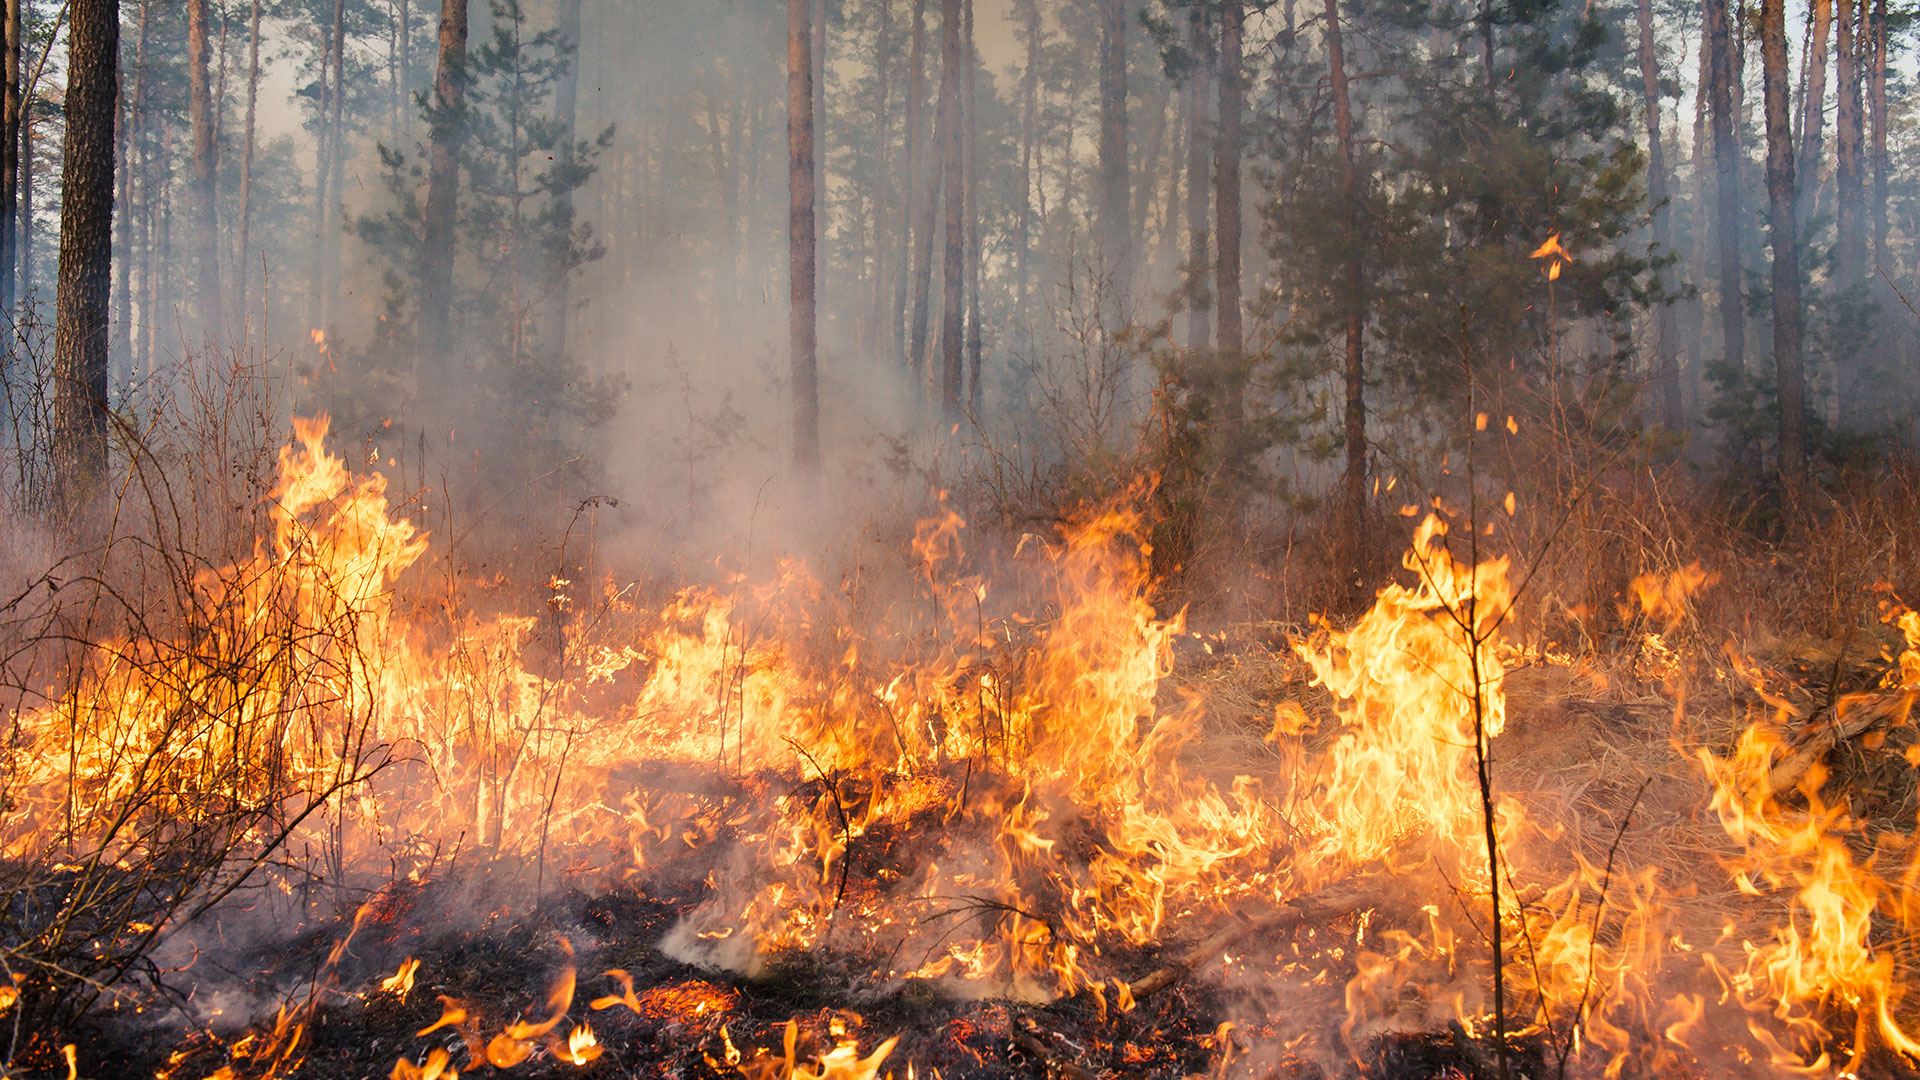 Five thousand hectares of forest under fire in Banke